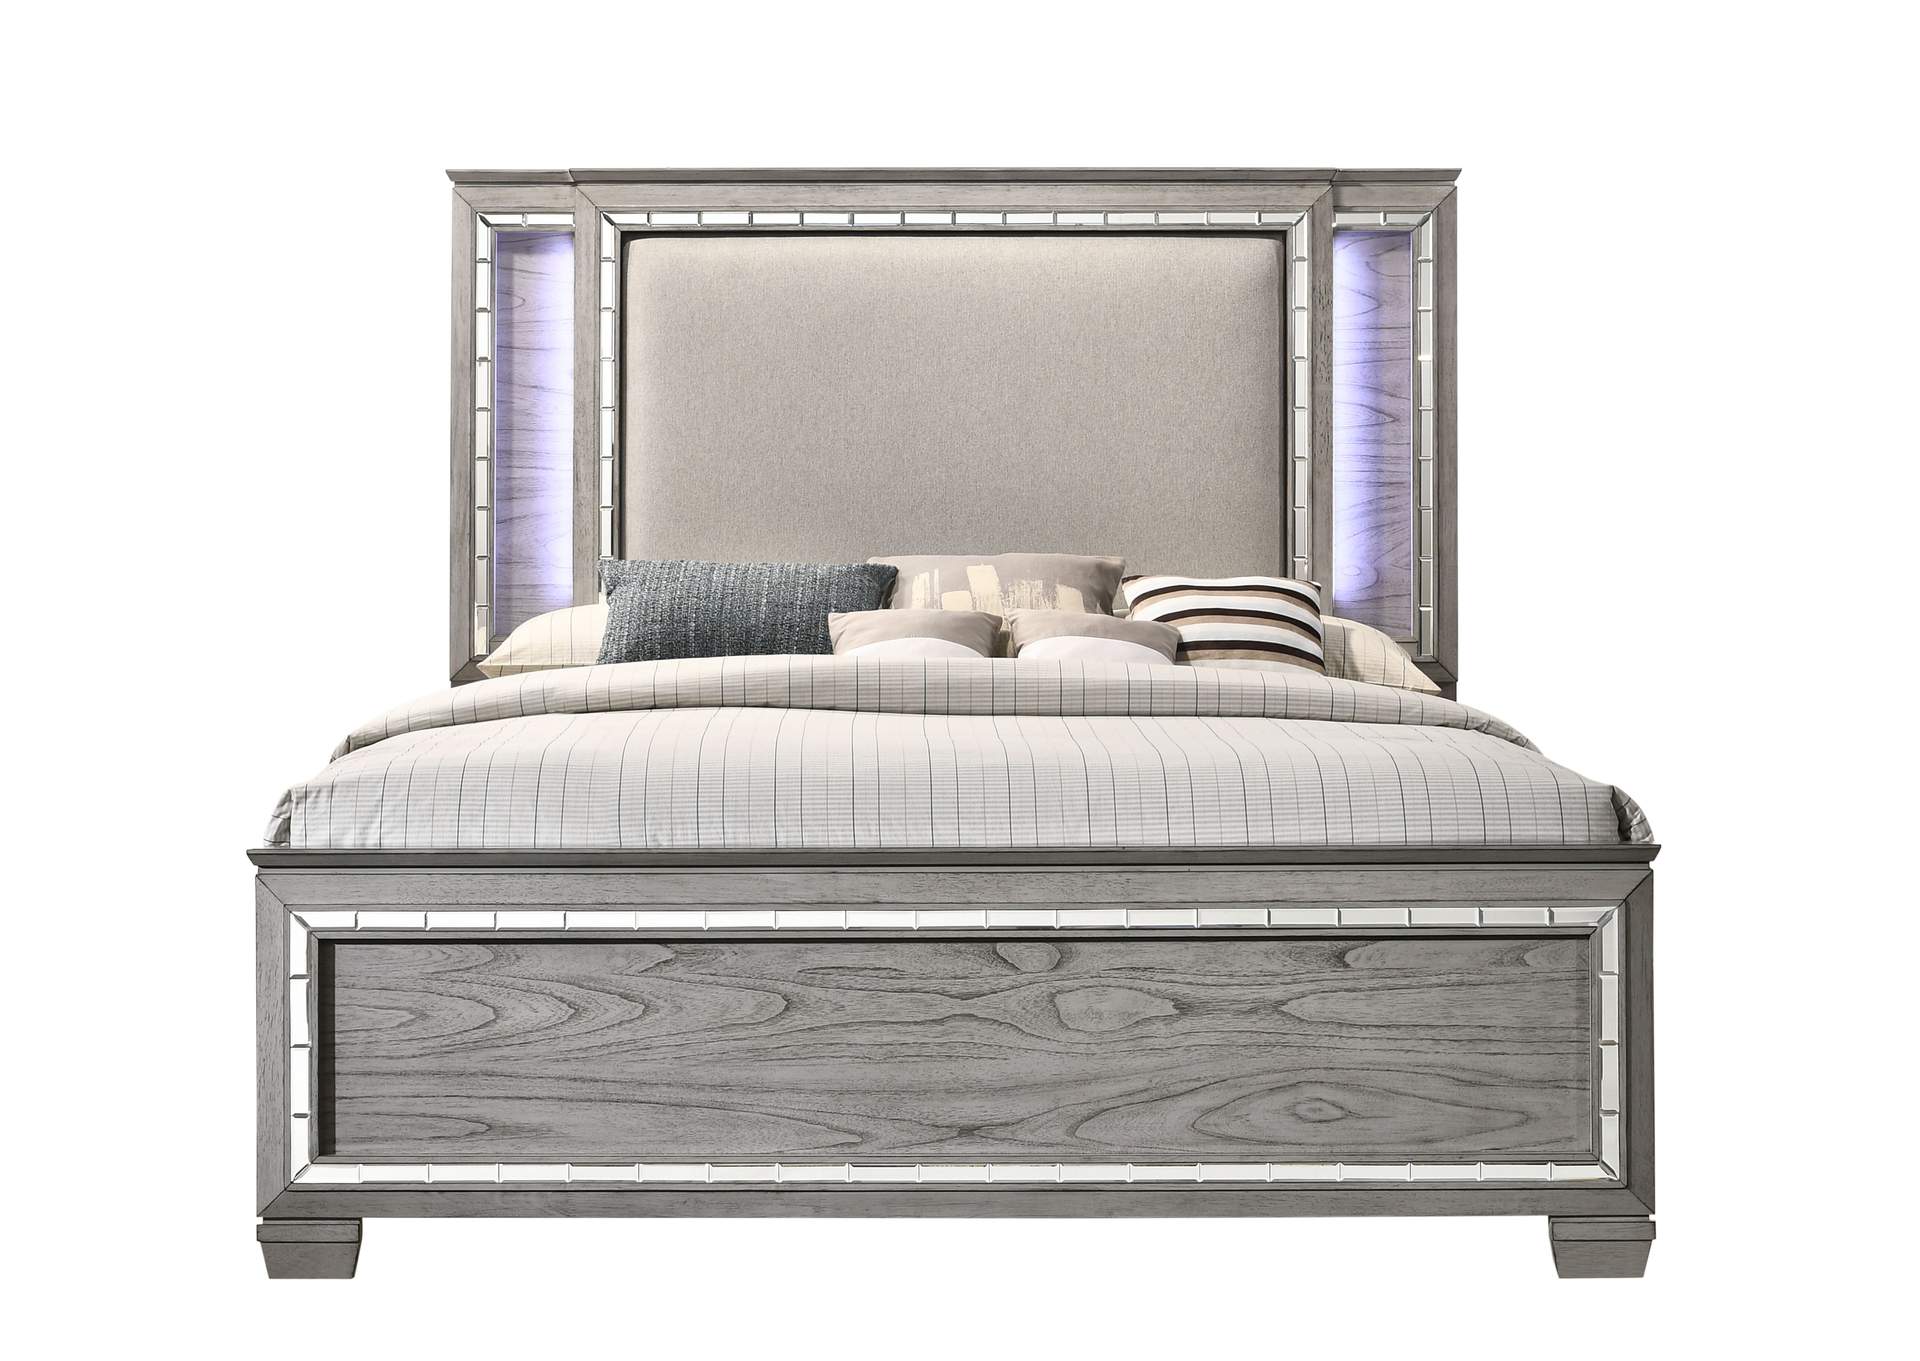 Antares Eastern King Bed,Acme